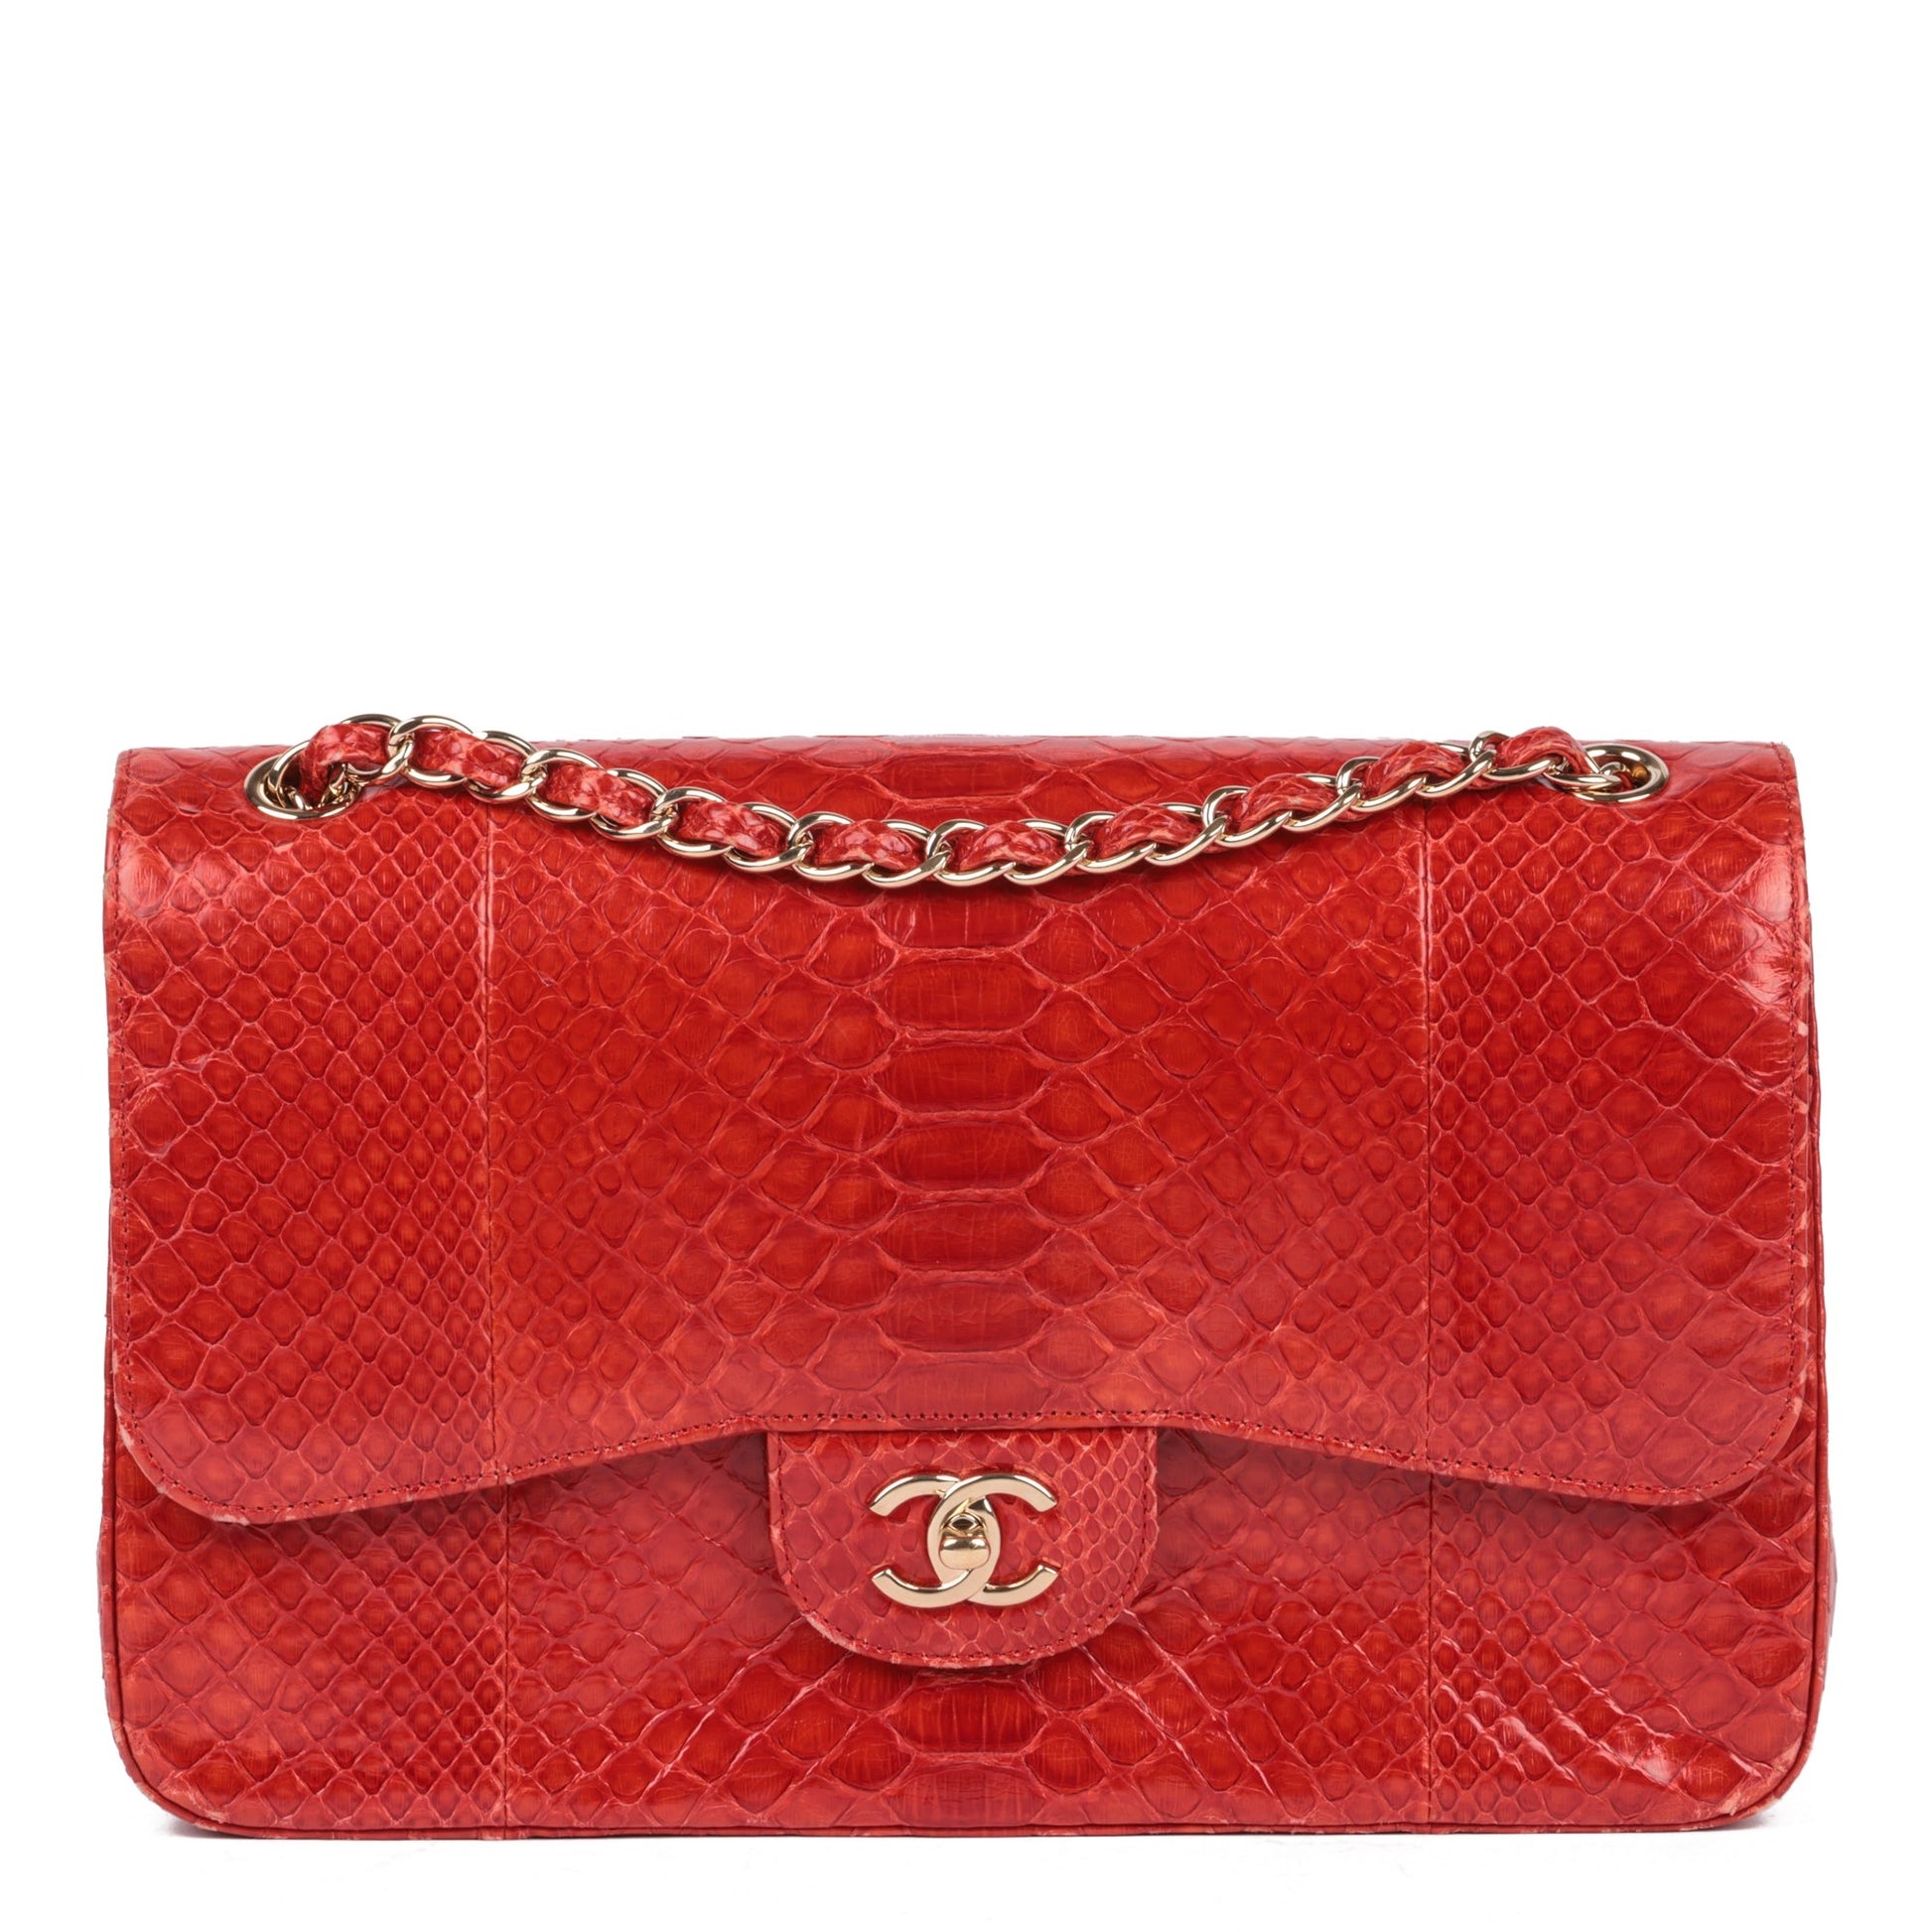 Chanel Red Python Leather Jumbo Classic Double Flap Bag